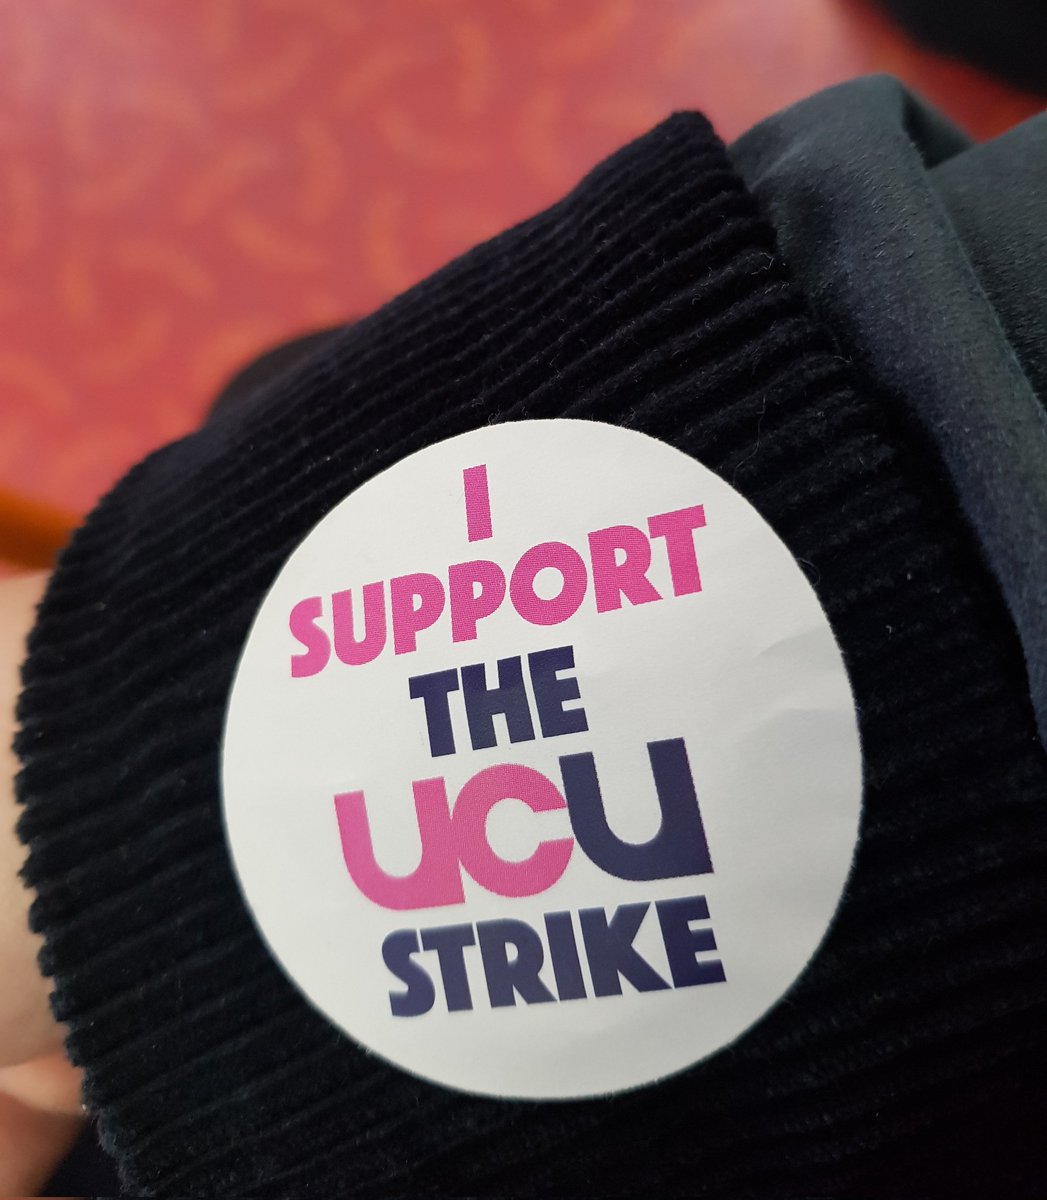 Back out on the picket today - several folk passing by assumed that the strikes have been cancelled due to the muddled comms from @ucu over the last few weeks. Not great but we carry on! 💪💪

#UCUstrike #ucuRISING